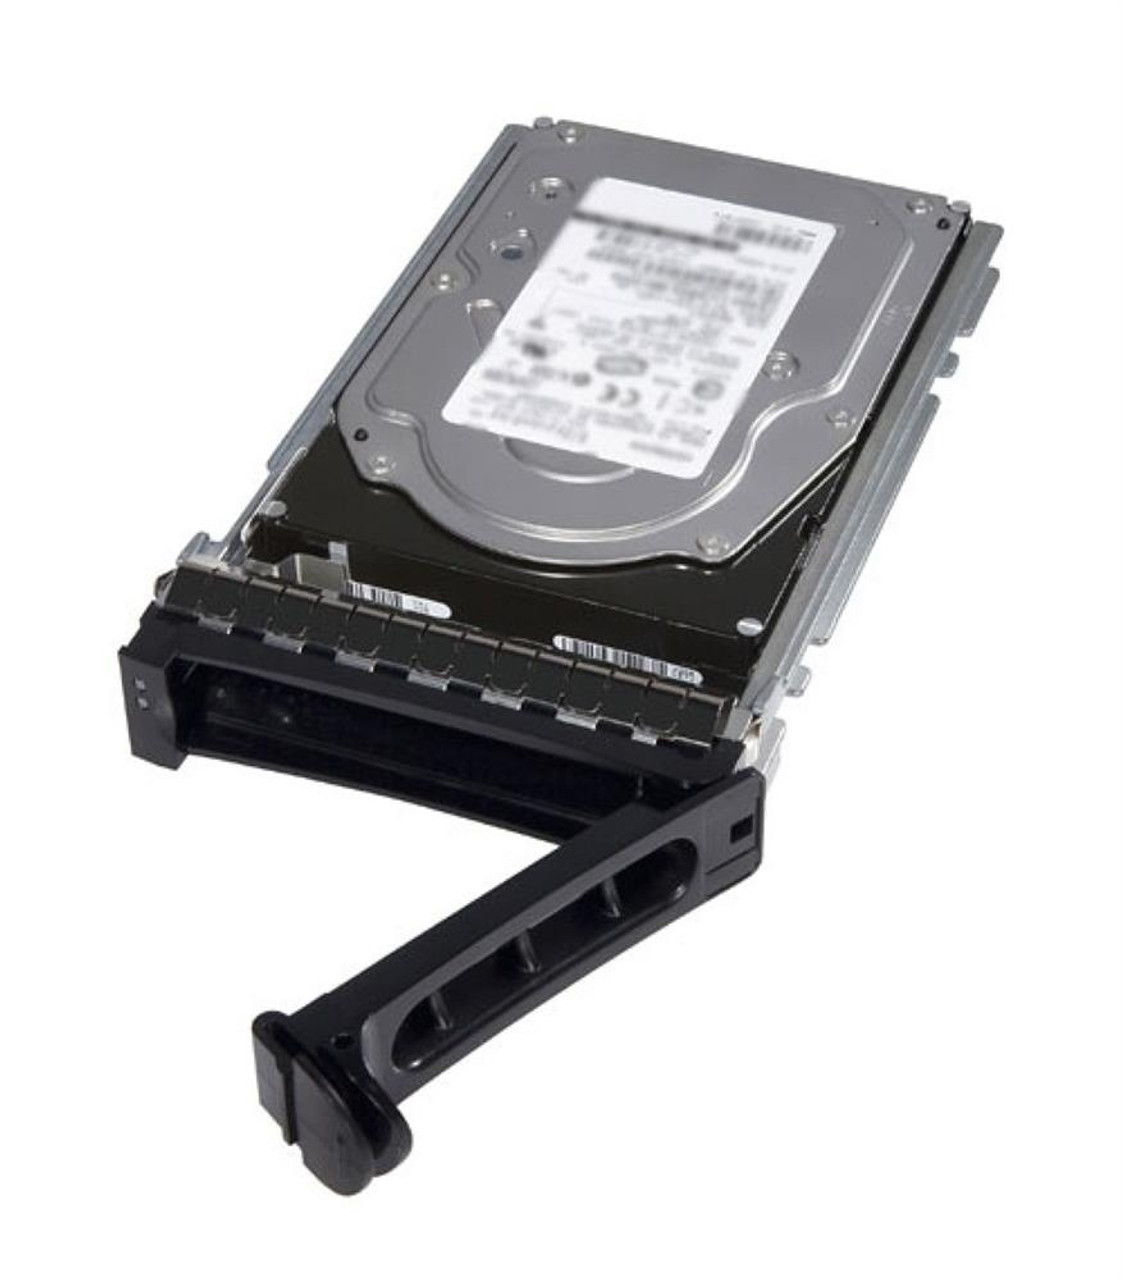 3F742-RFB Dell 73GB 10000RPM Ultra-160 SCSI 80-Pin Hot Swap 8MB Cache 3.5-inch Internal Hard Drive with Tray